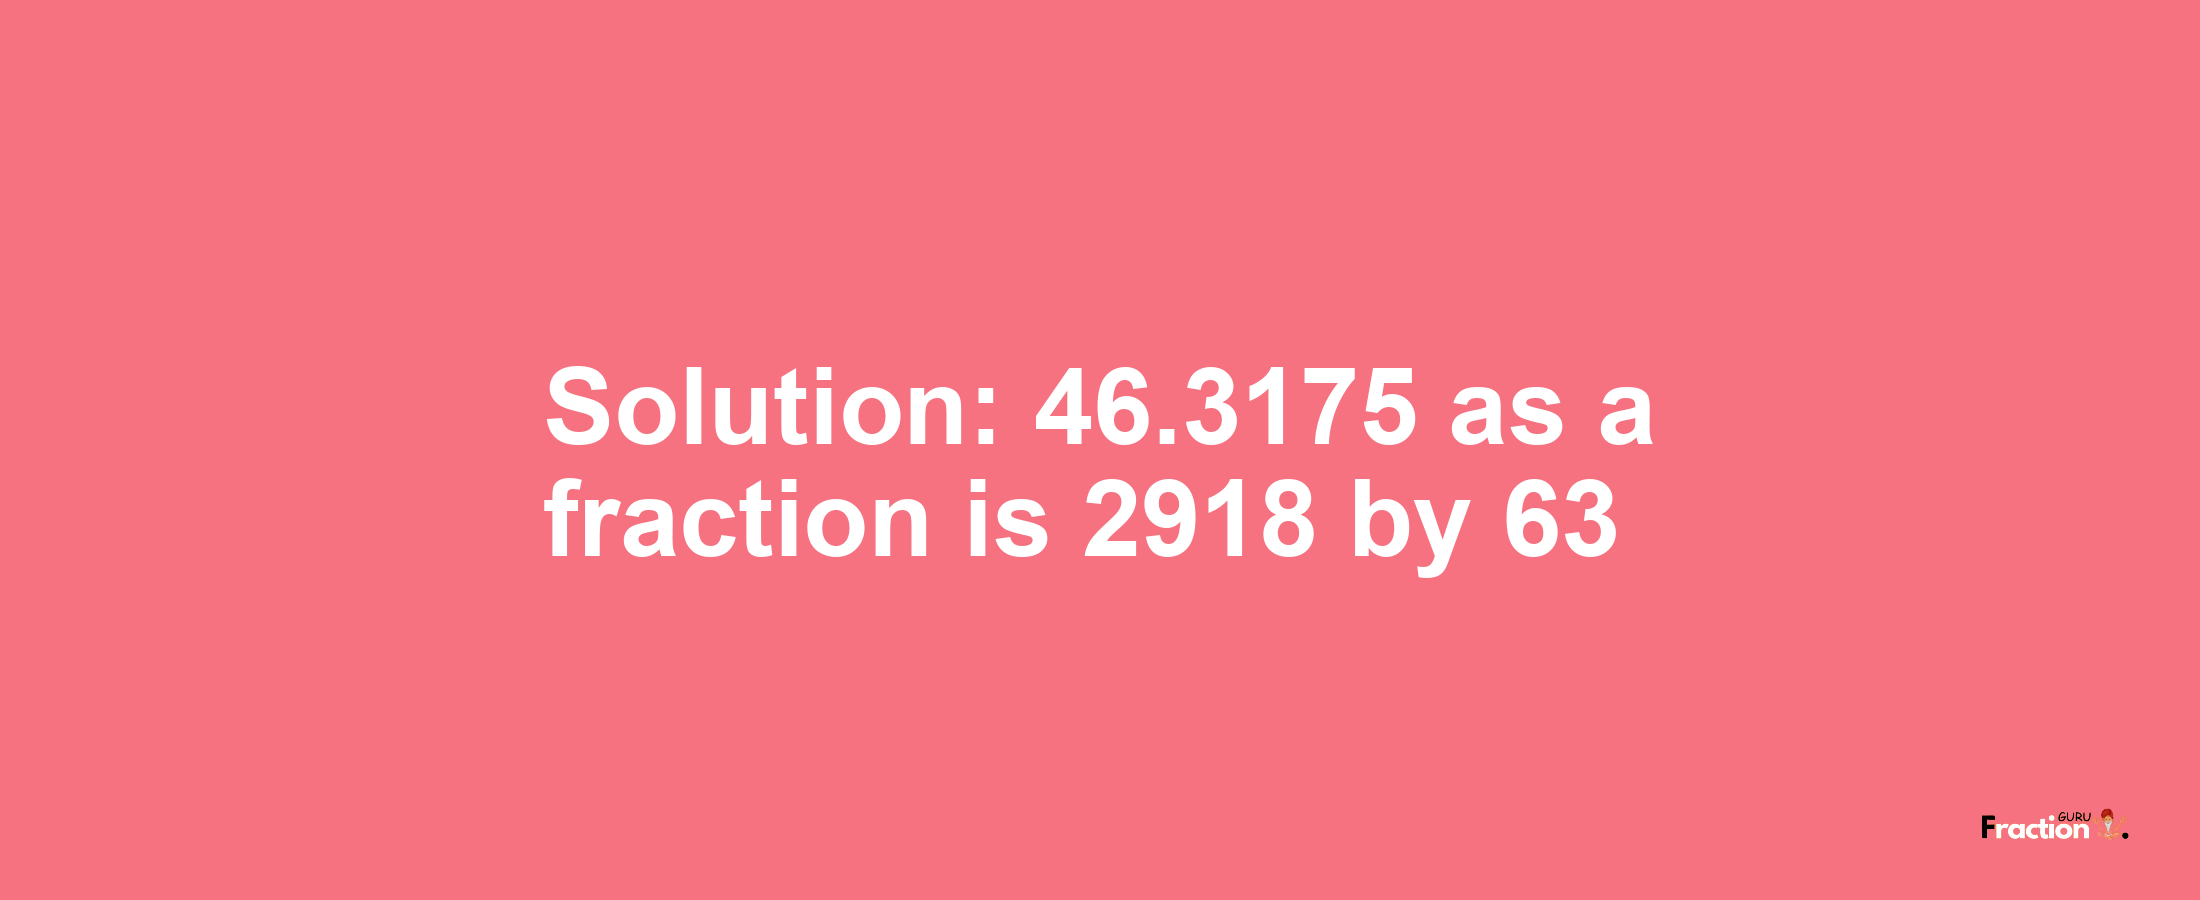 Solution:46.3175 as a fraction is 2918/63